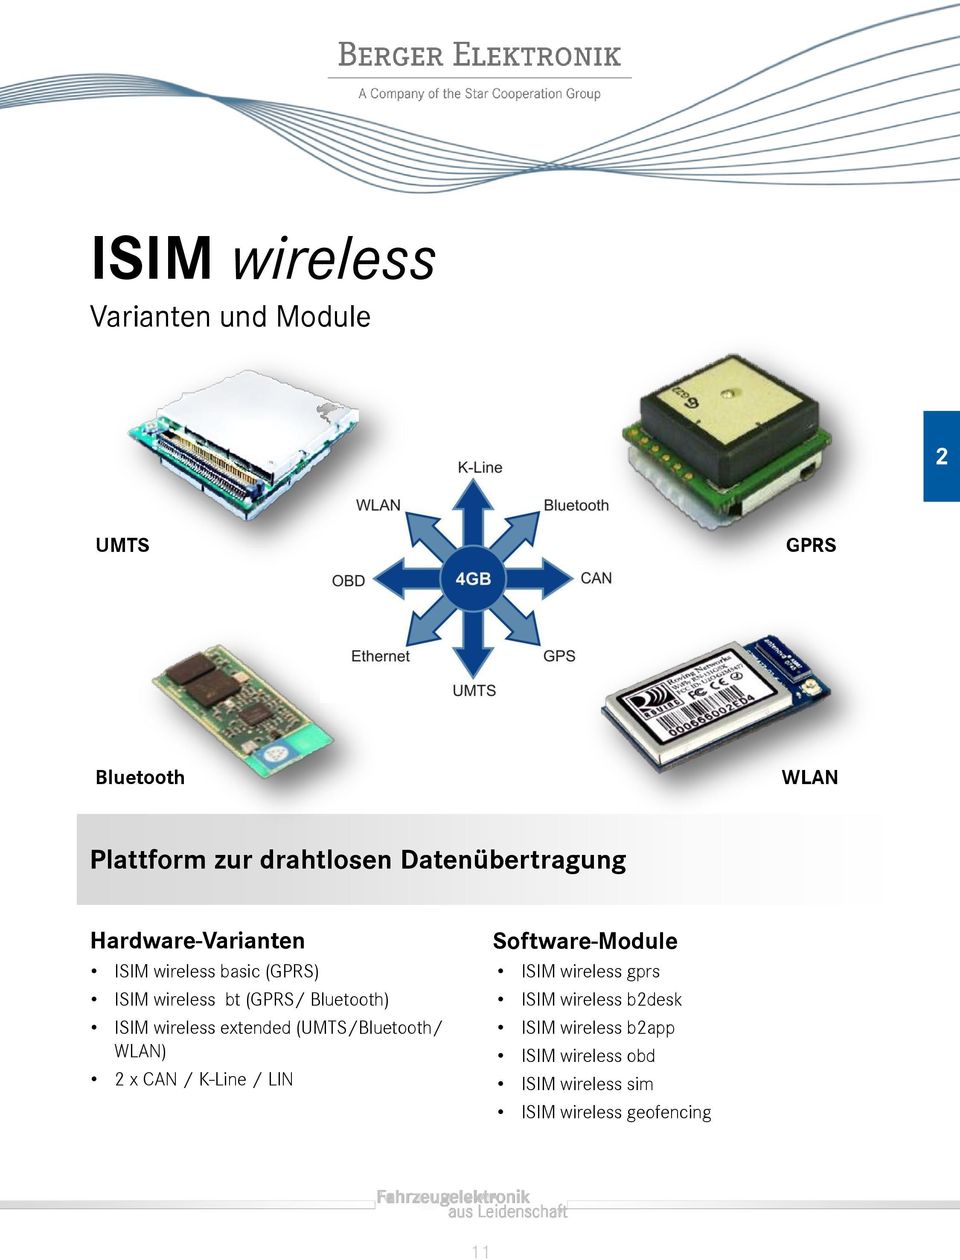 ISIM wireless extended (UMTS/Bluetooth/ WLAN) 2 x CAN / K-Line / LIN Software-Module ISIM wireless